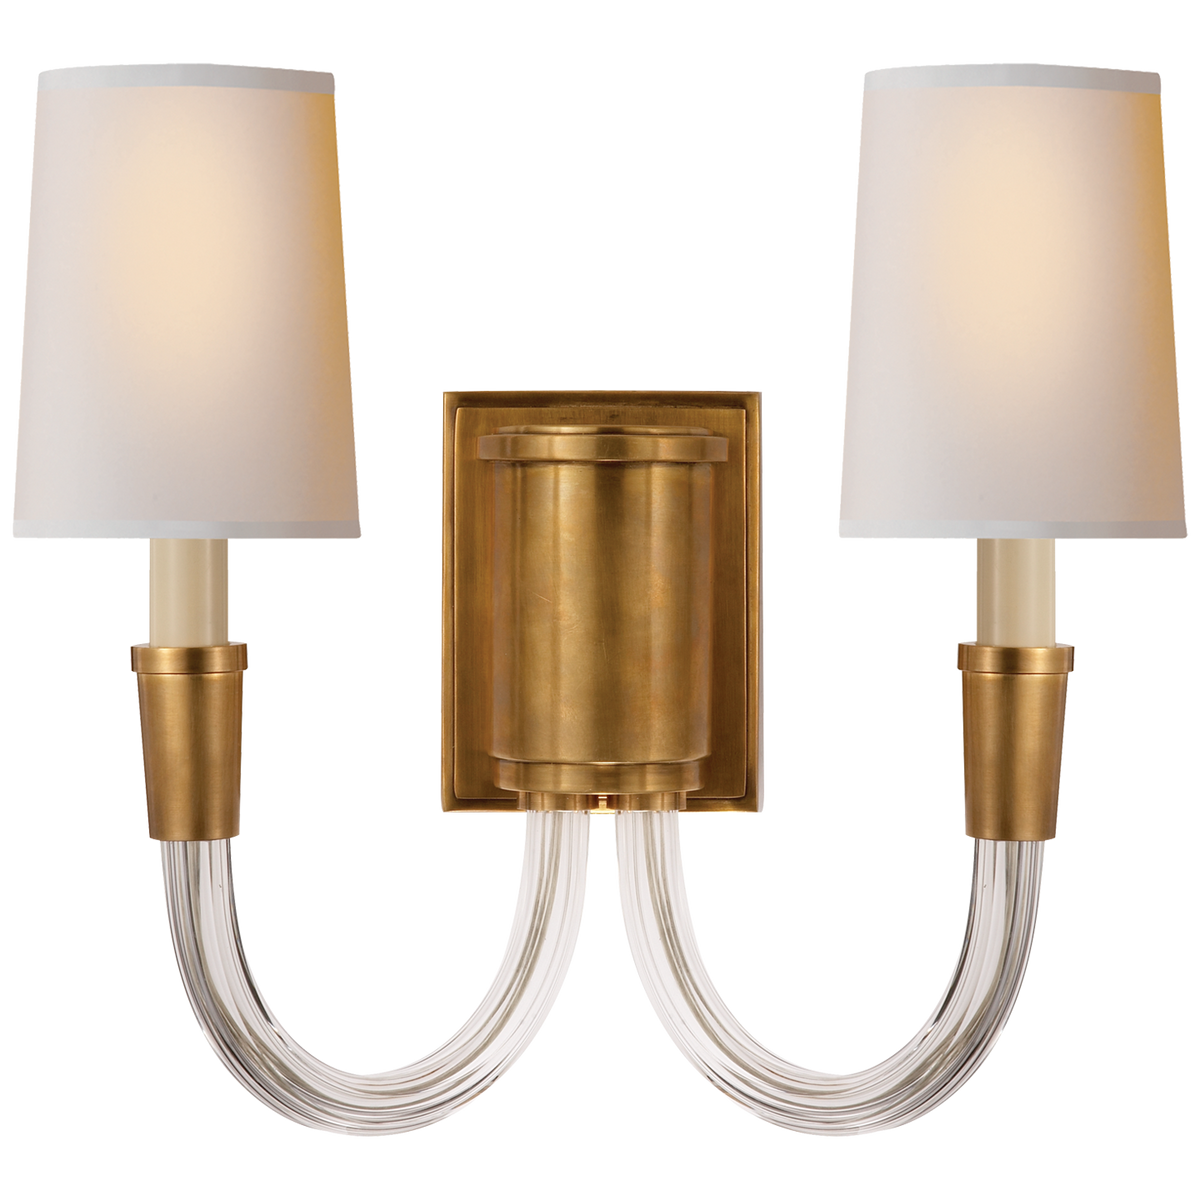 Vivian Double Sconce - Hand Rubbed Antique Brass with Natural Paper Shade